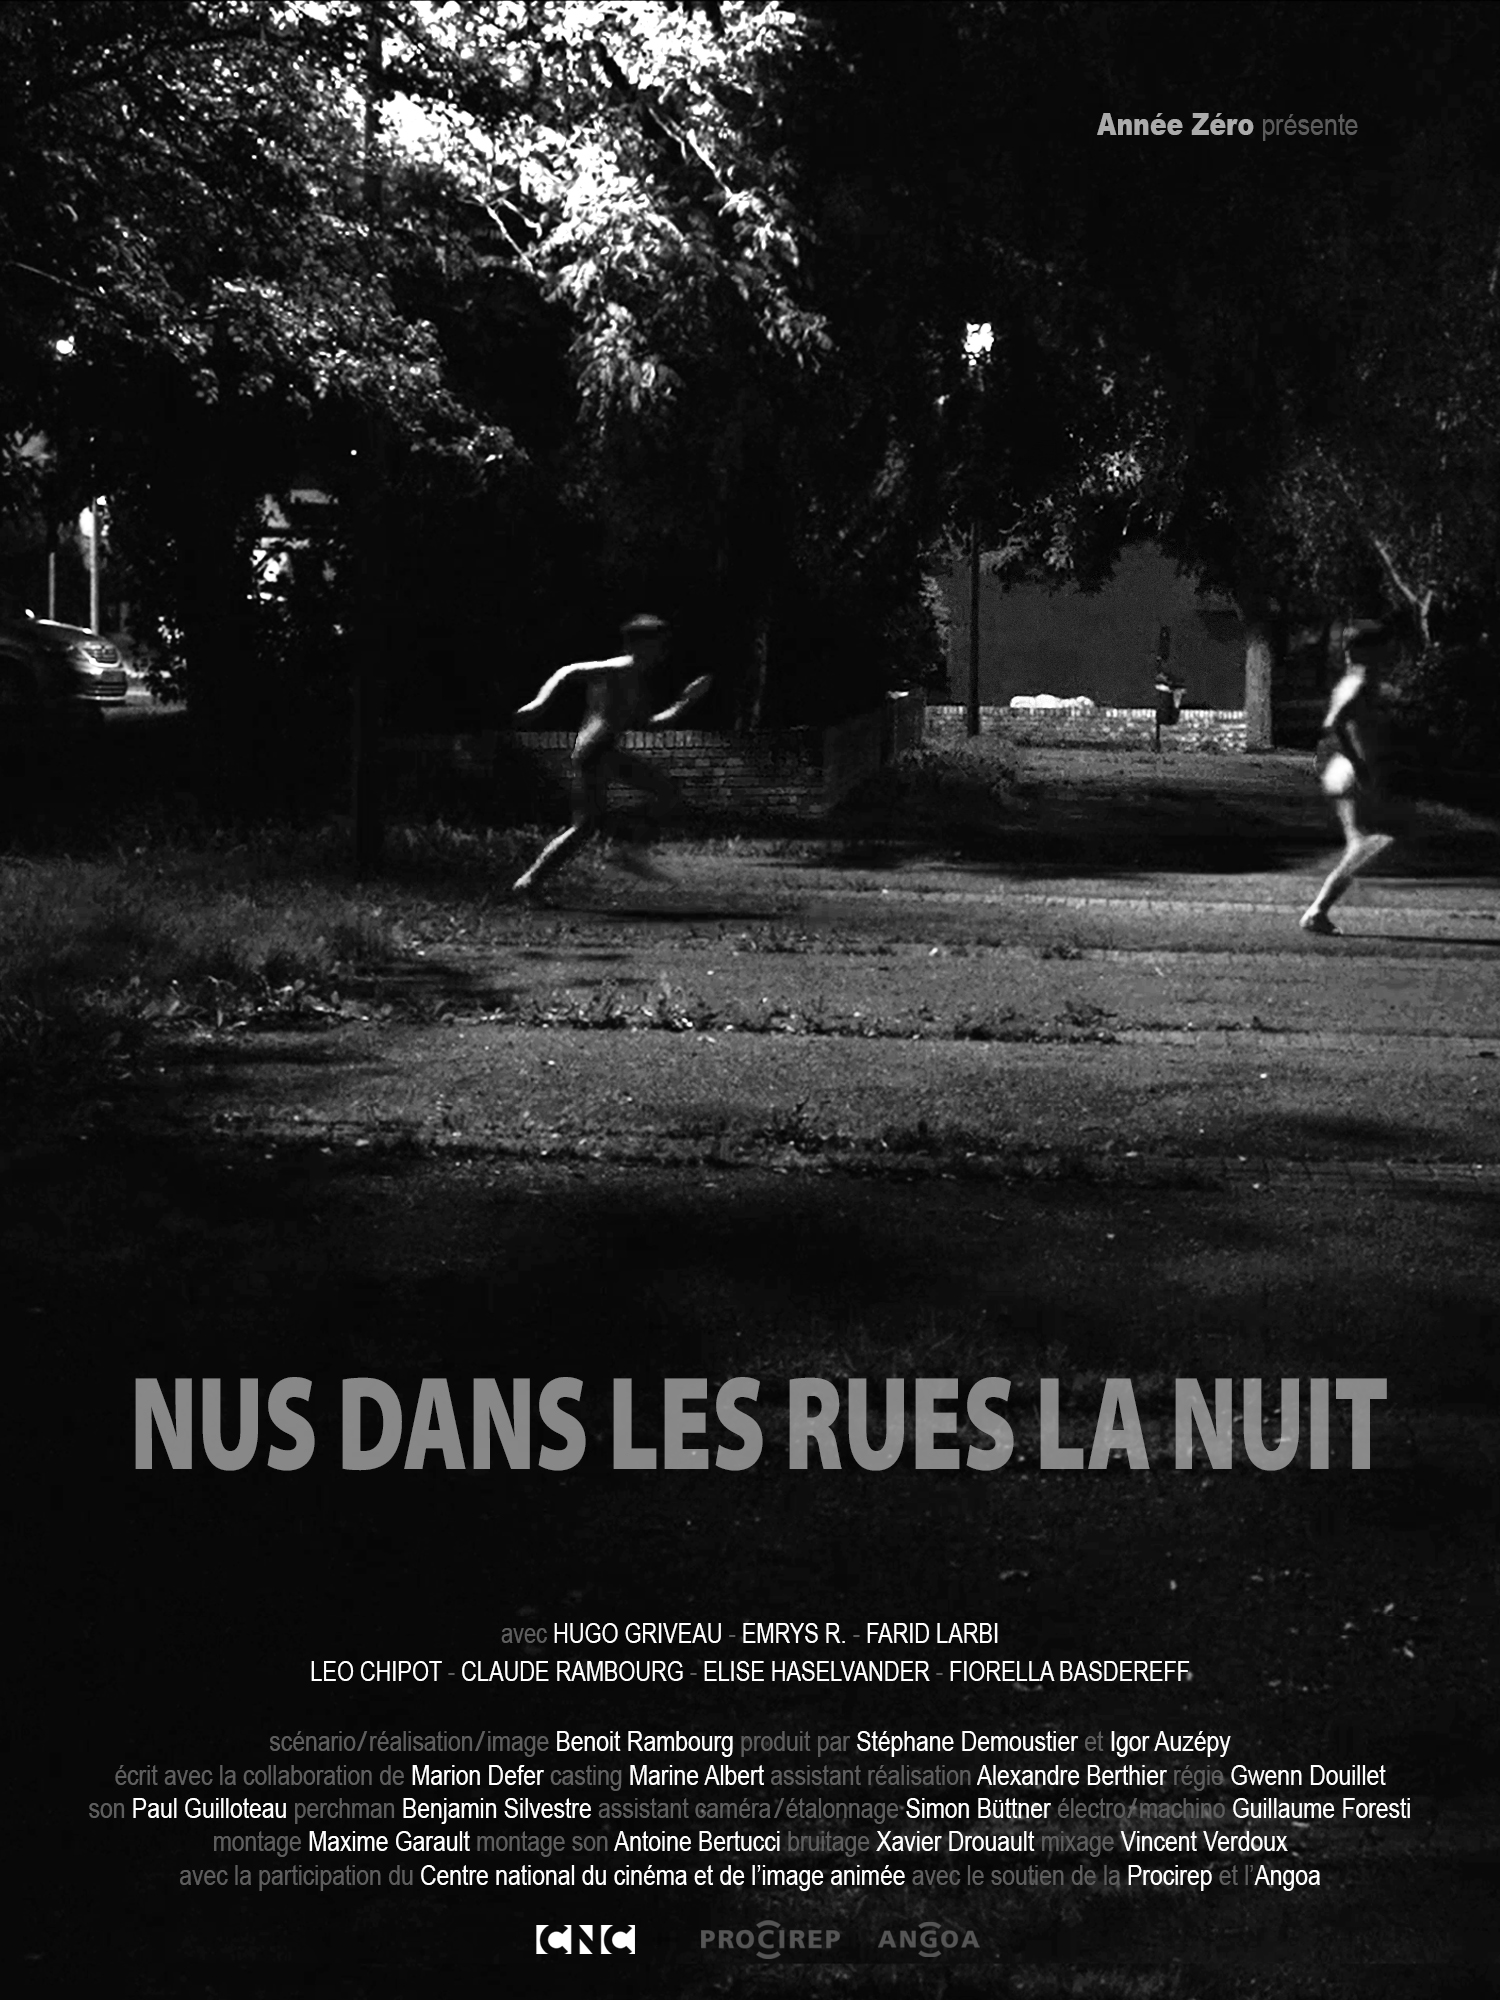 Naked in the Streets at Night (2019) Screenshot 1